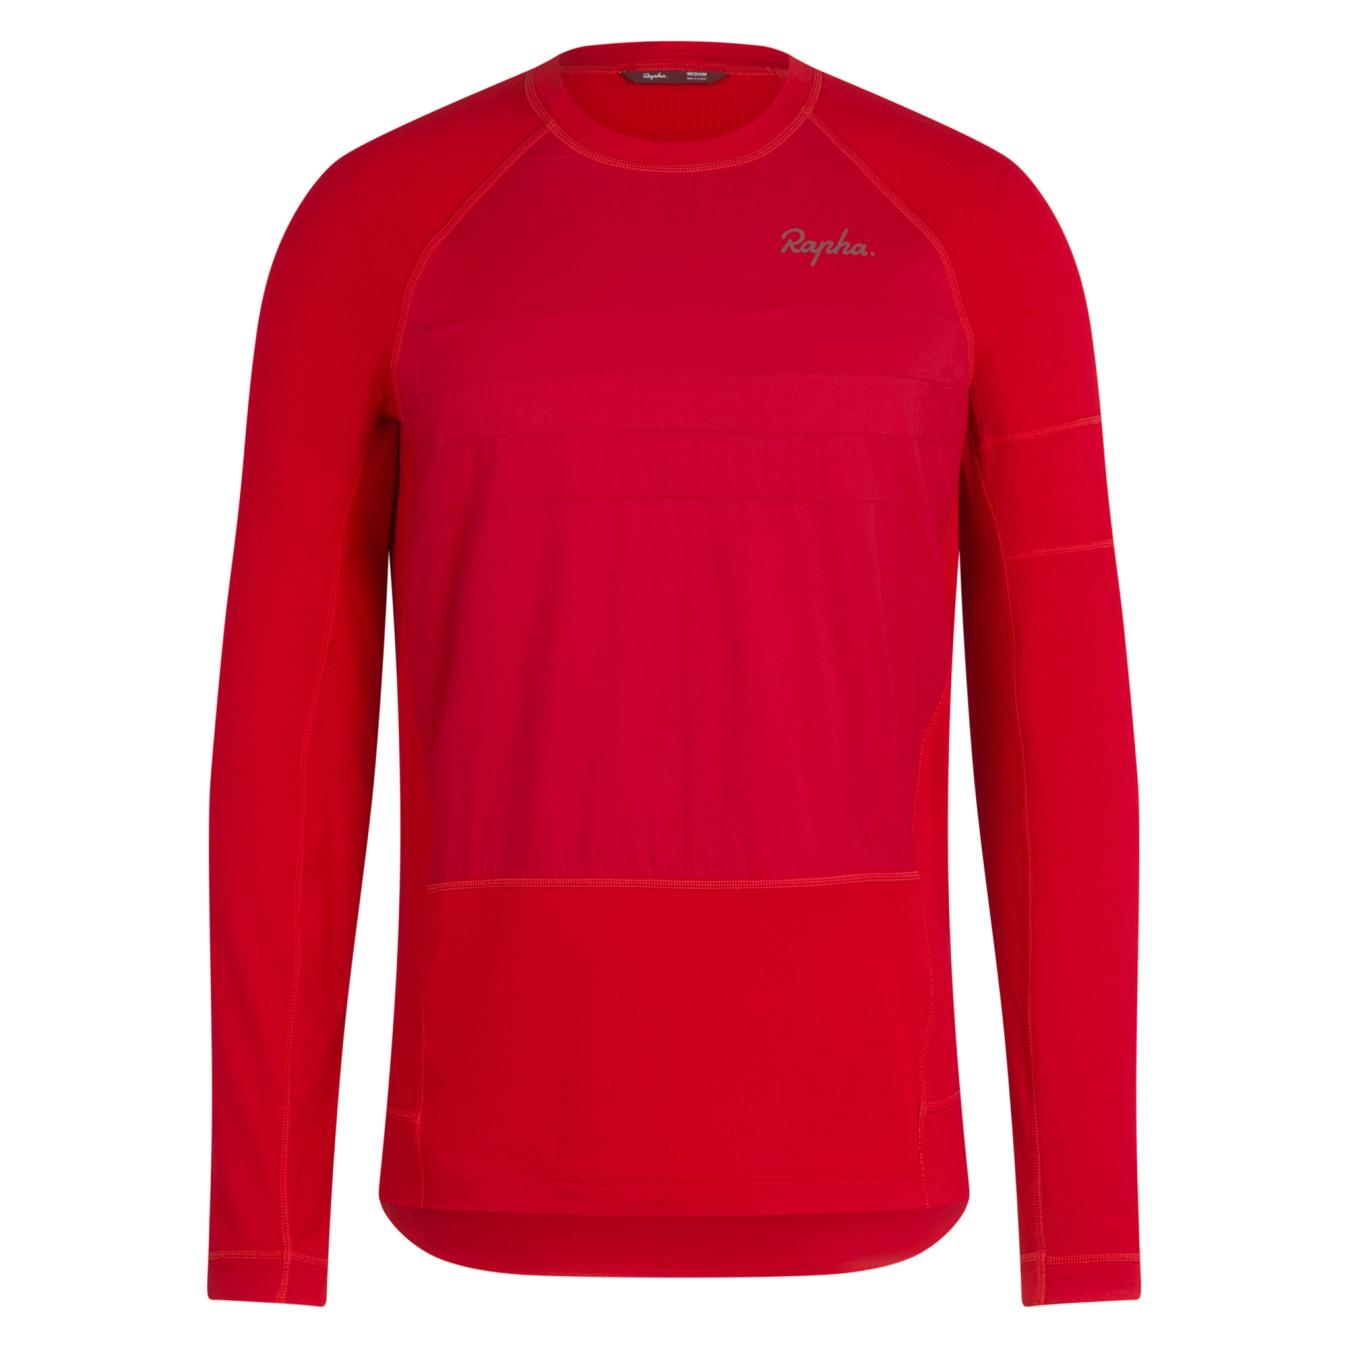 The Explore pullover has been added to the range as a lightweight base layer 